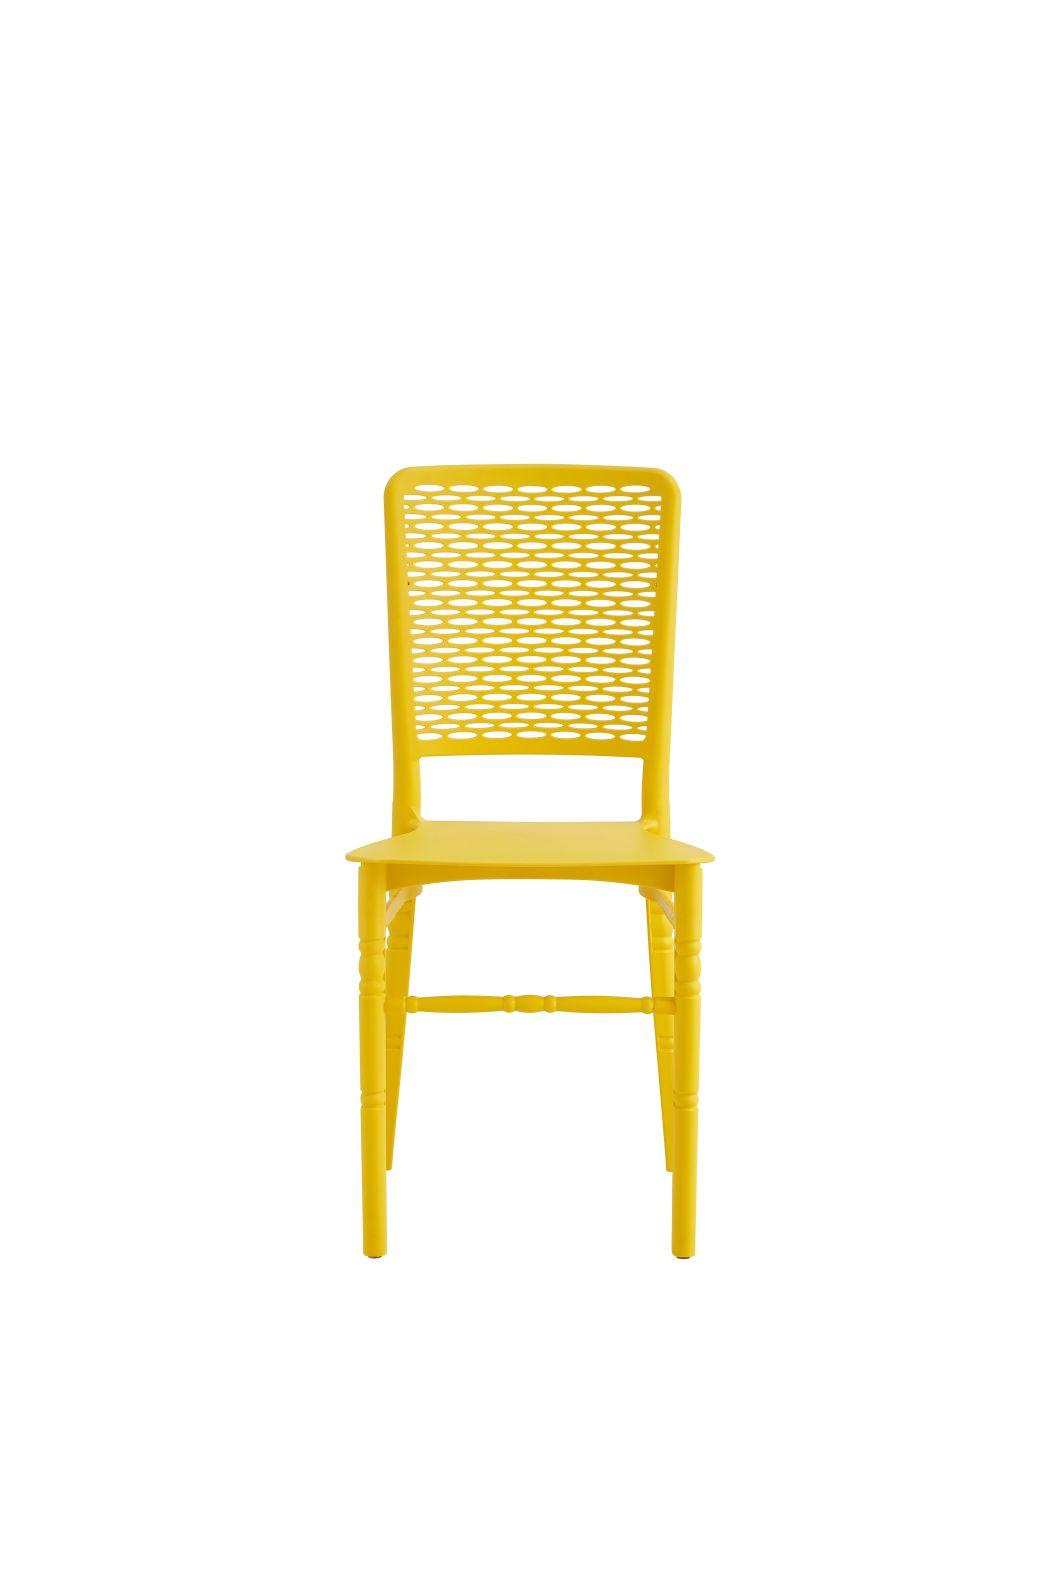 Cheap Nordic Outdoor Stackable Sitting School Student Stool Plastic Chairs Dining Chair Used for Sale